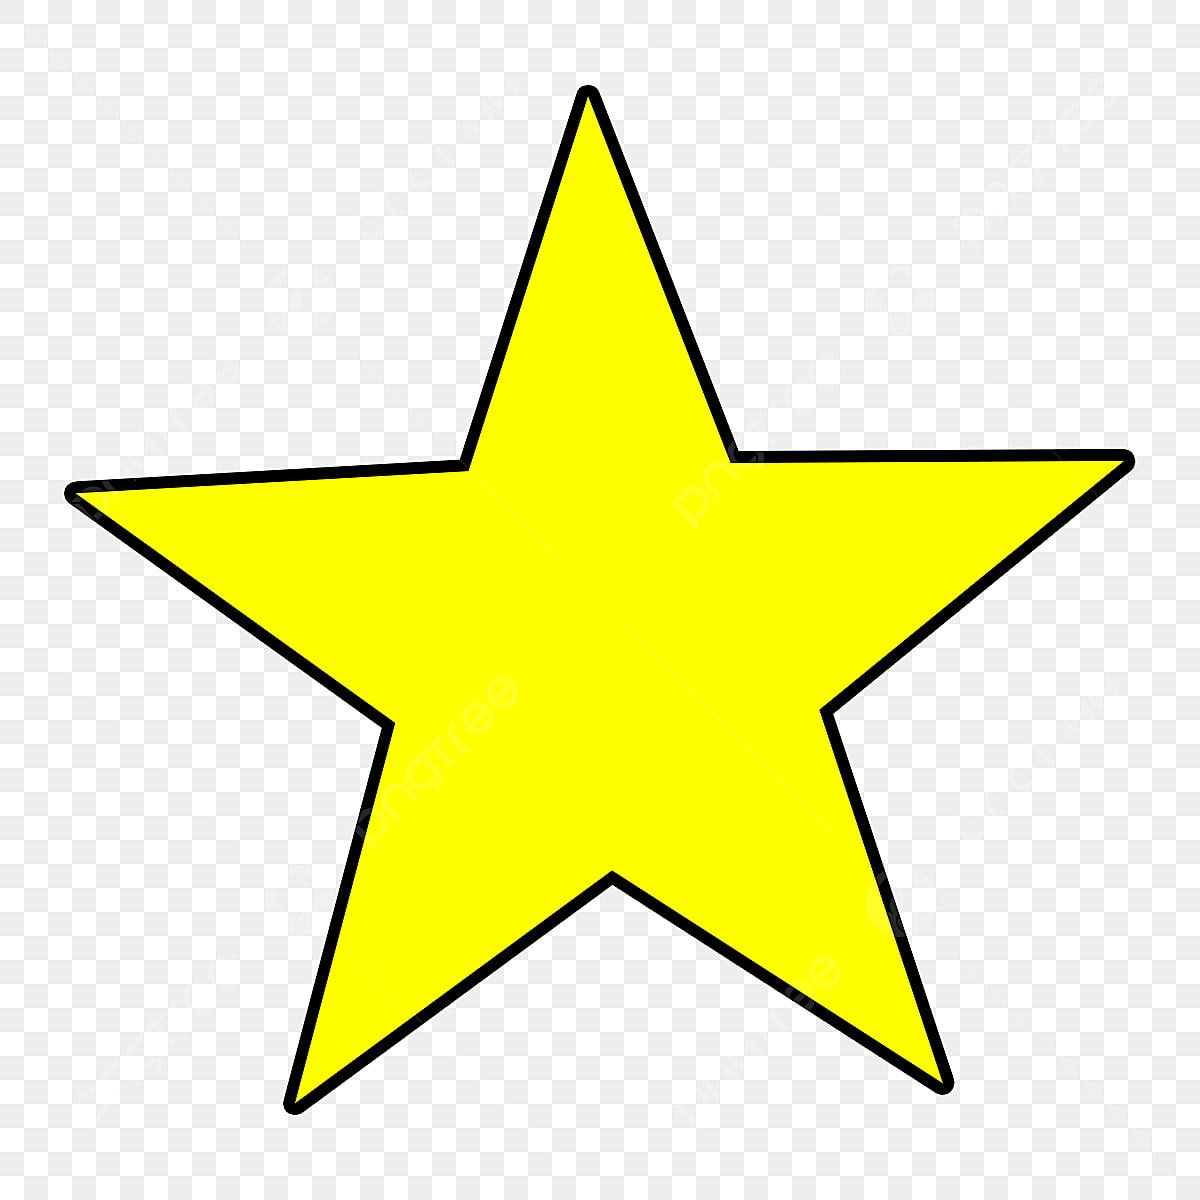 pngtree-classic-yellow-stars-clipart-png-image_5568033